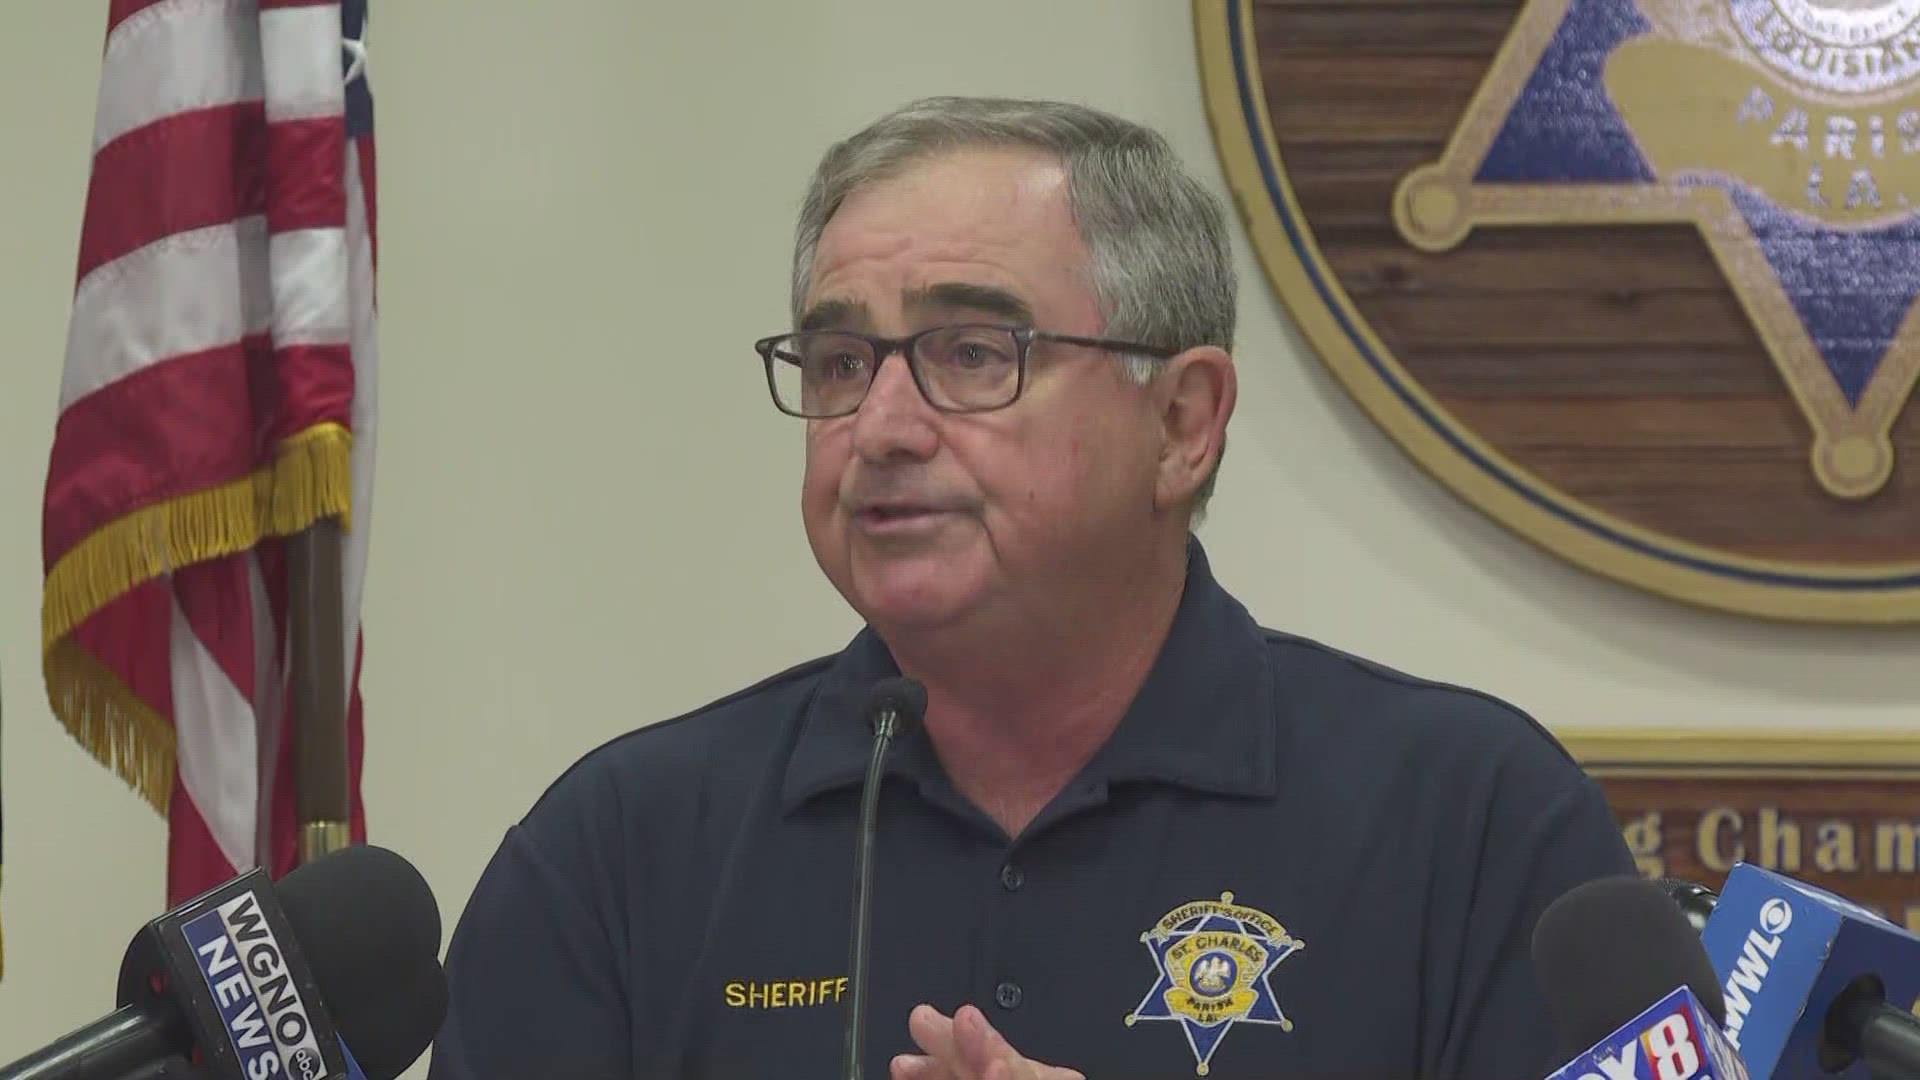 Sheriff Greg Champagne said that the woman merely wanted to learn English and that no nefarious action took place.